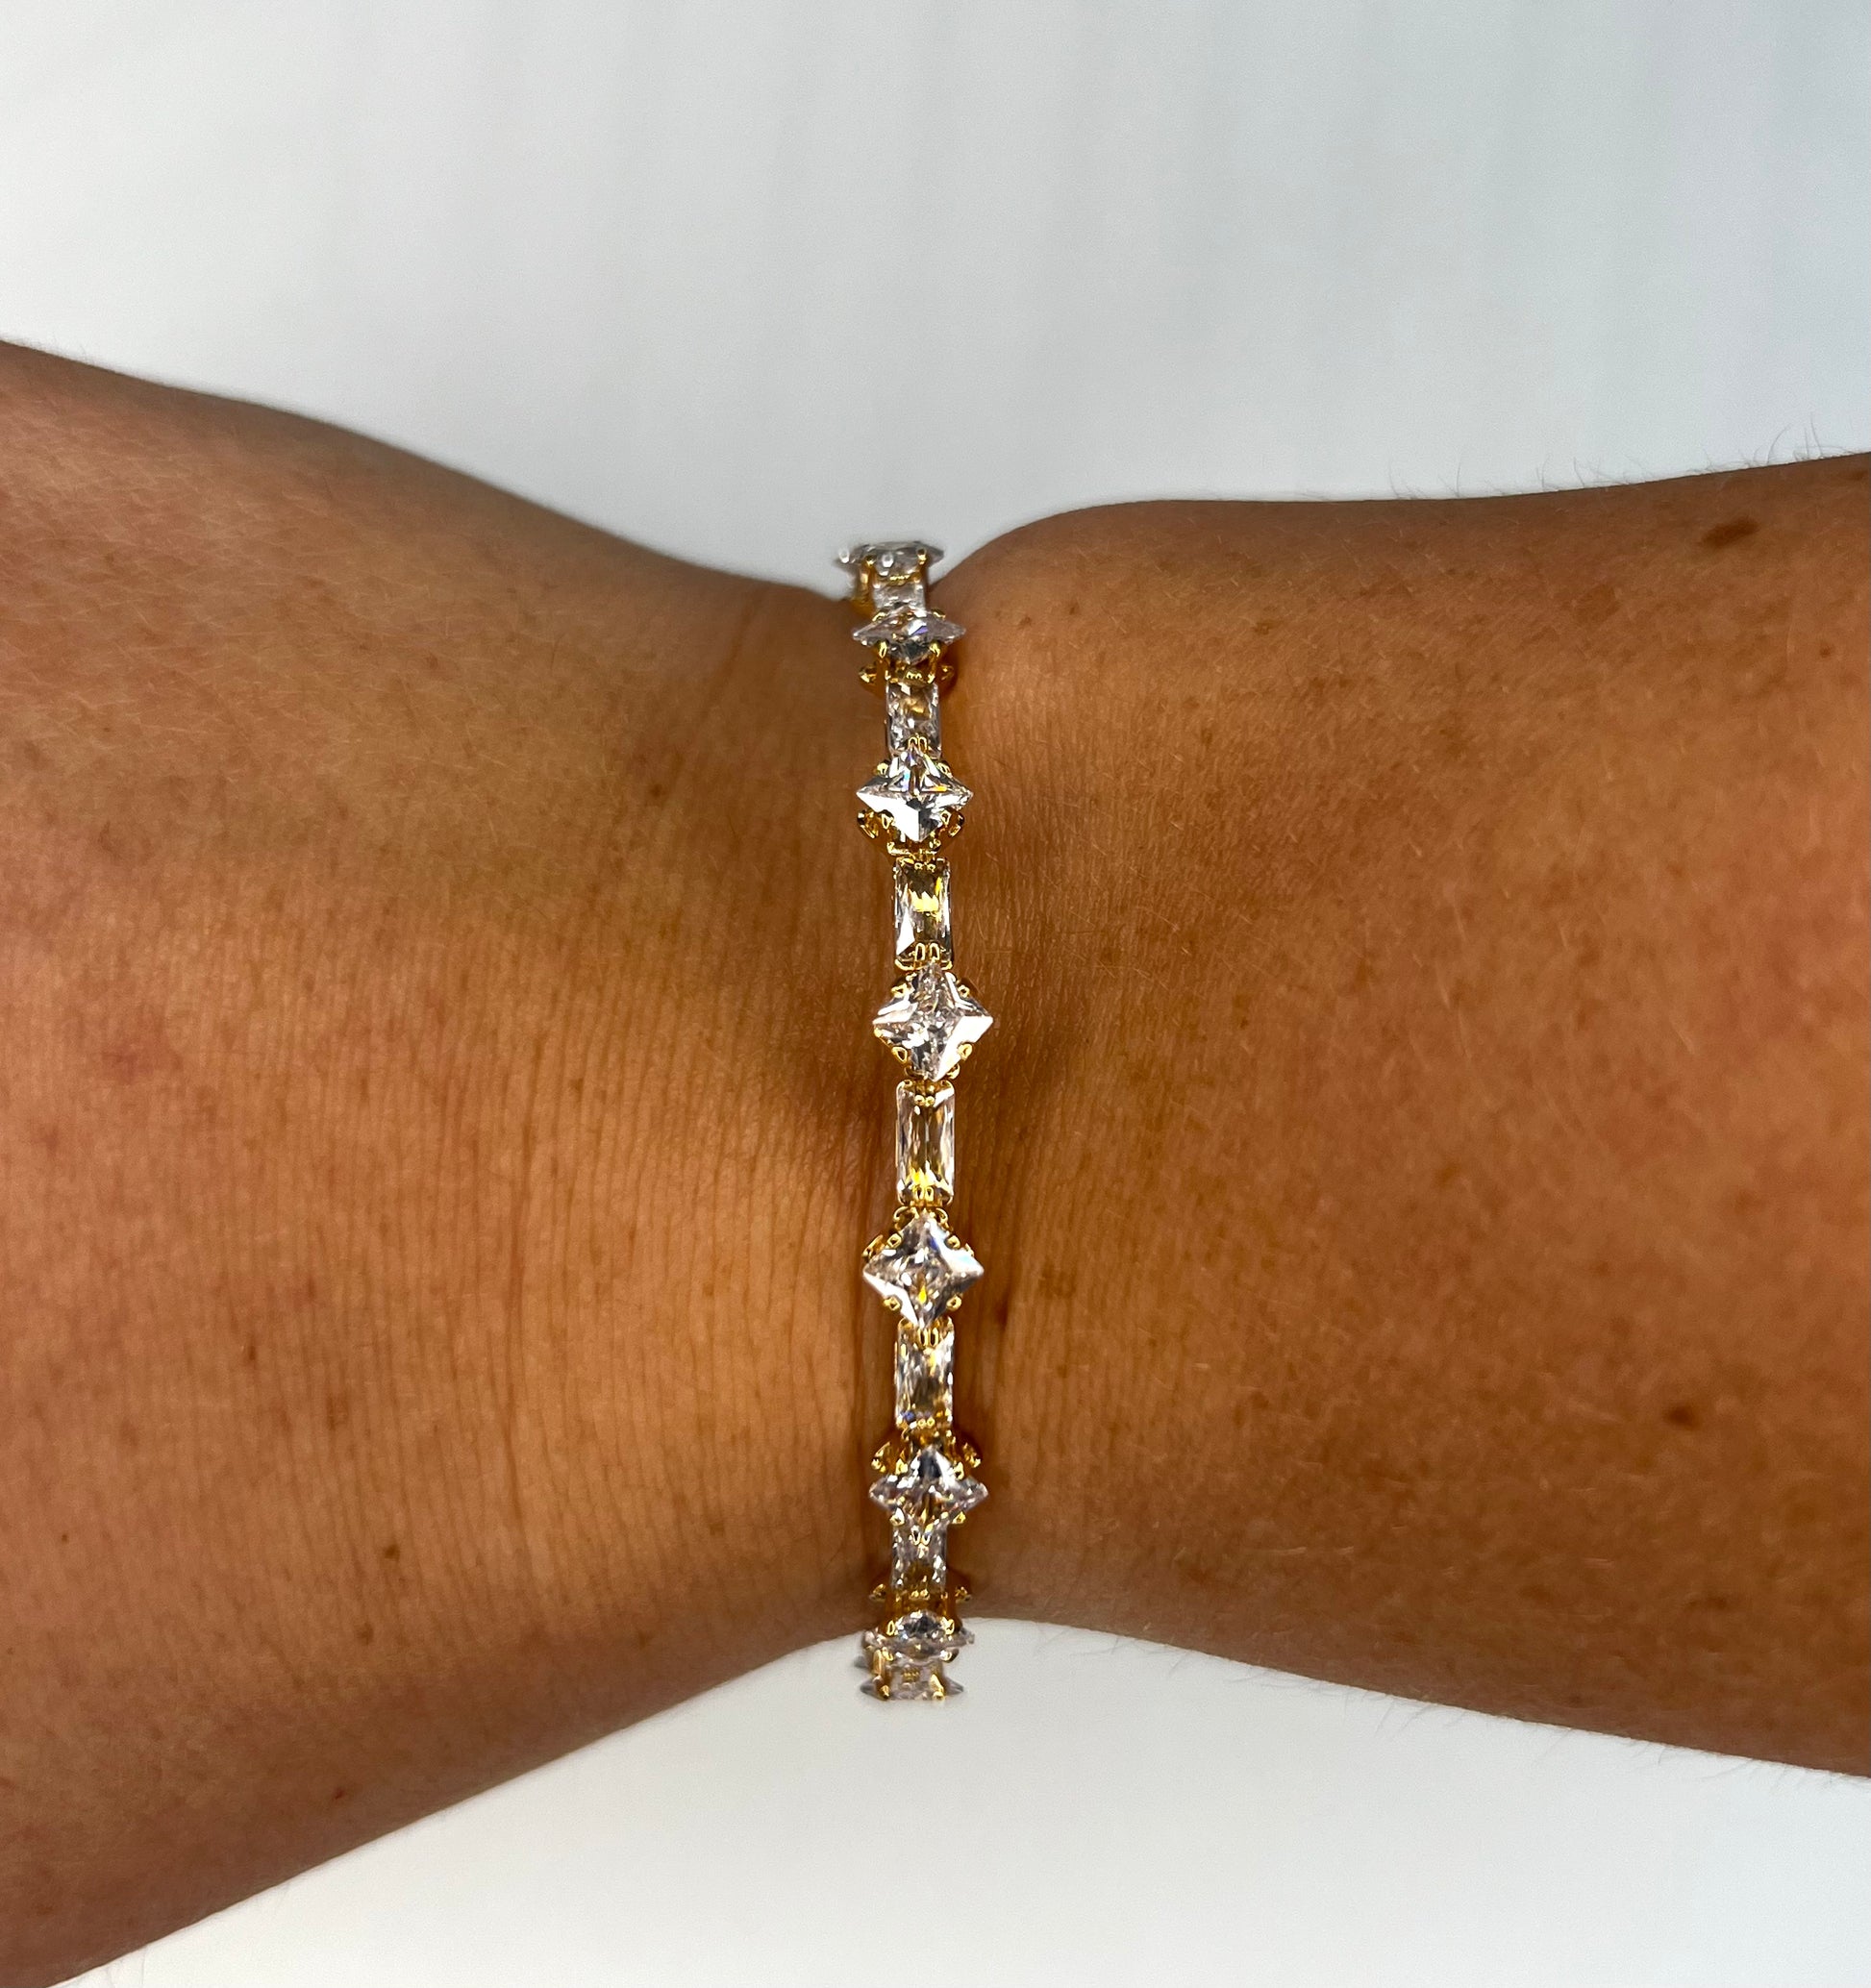 Our Cuff Bangles are the perfect accessory to complete any look. Crafted in silver, they come in a variety of styles to fit any wardrobe. They are also adjustable to ensure the perfect fit.